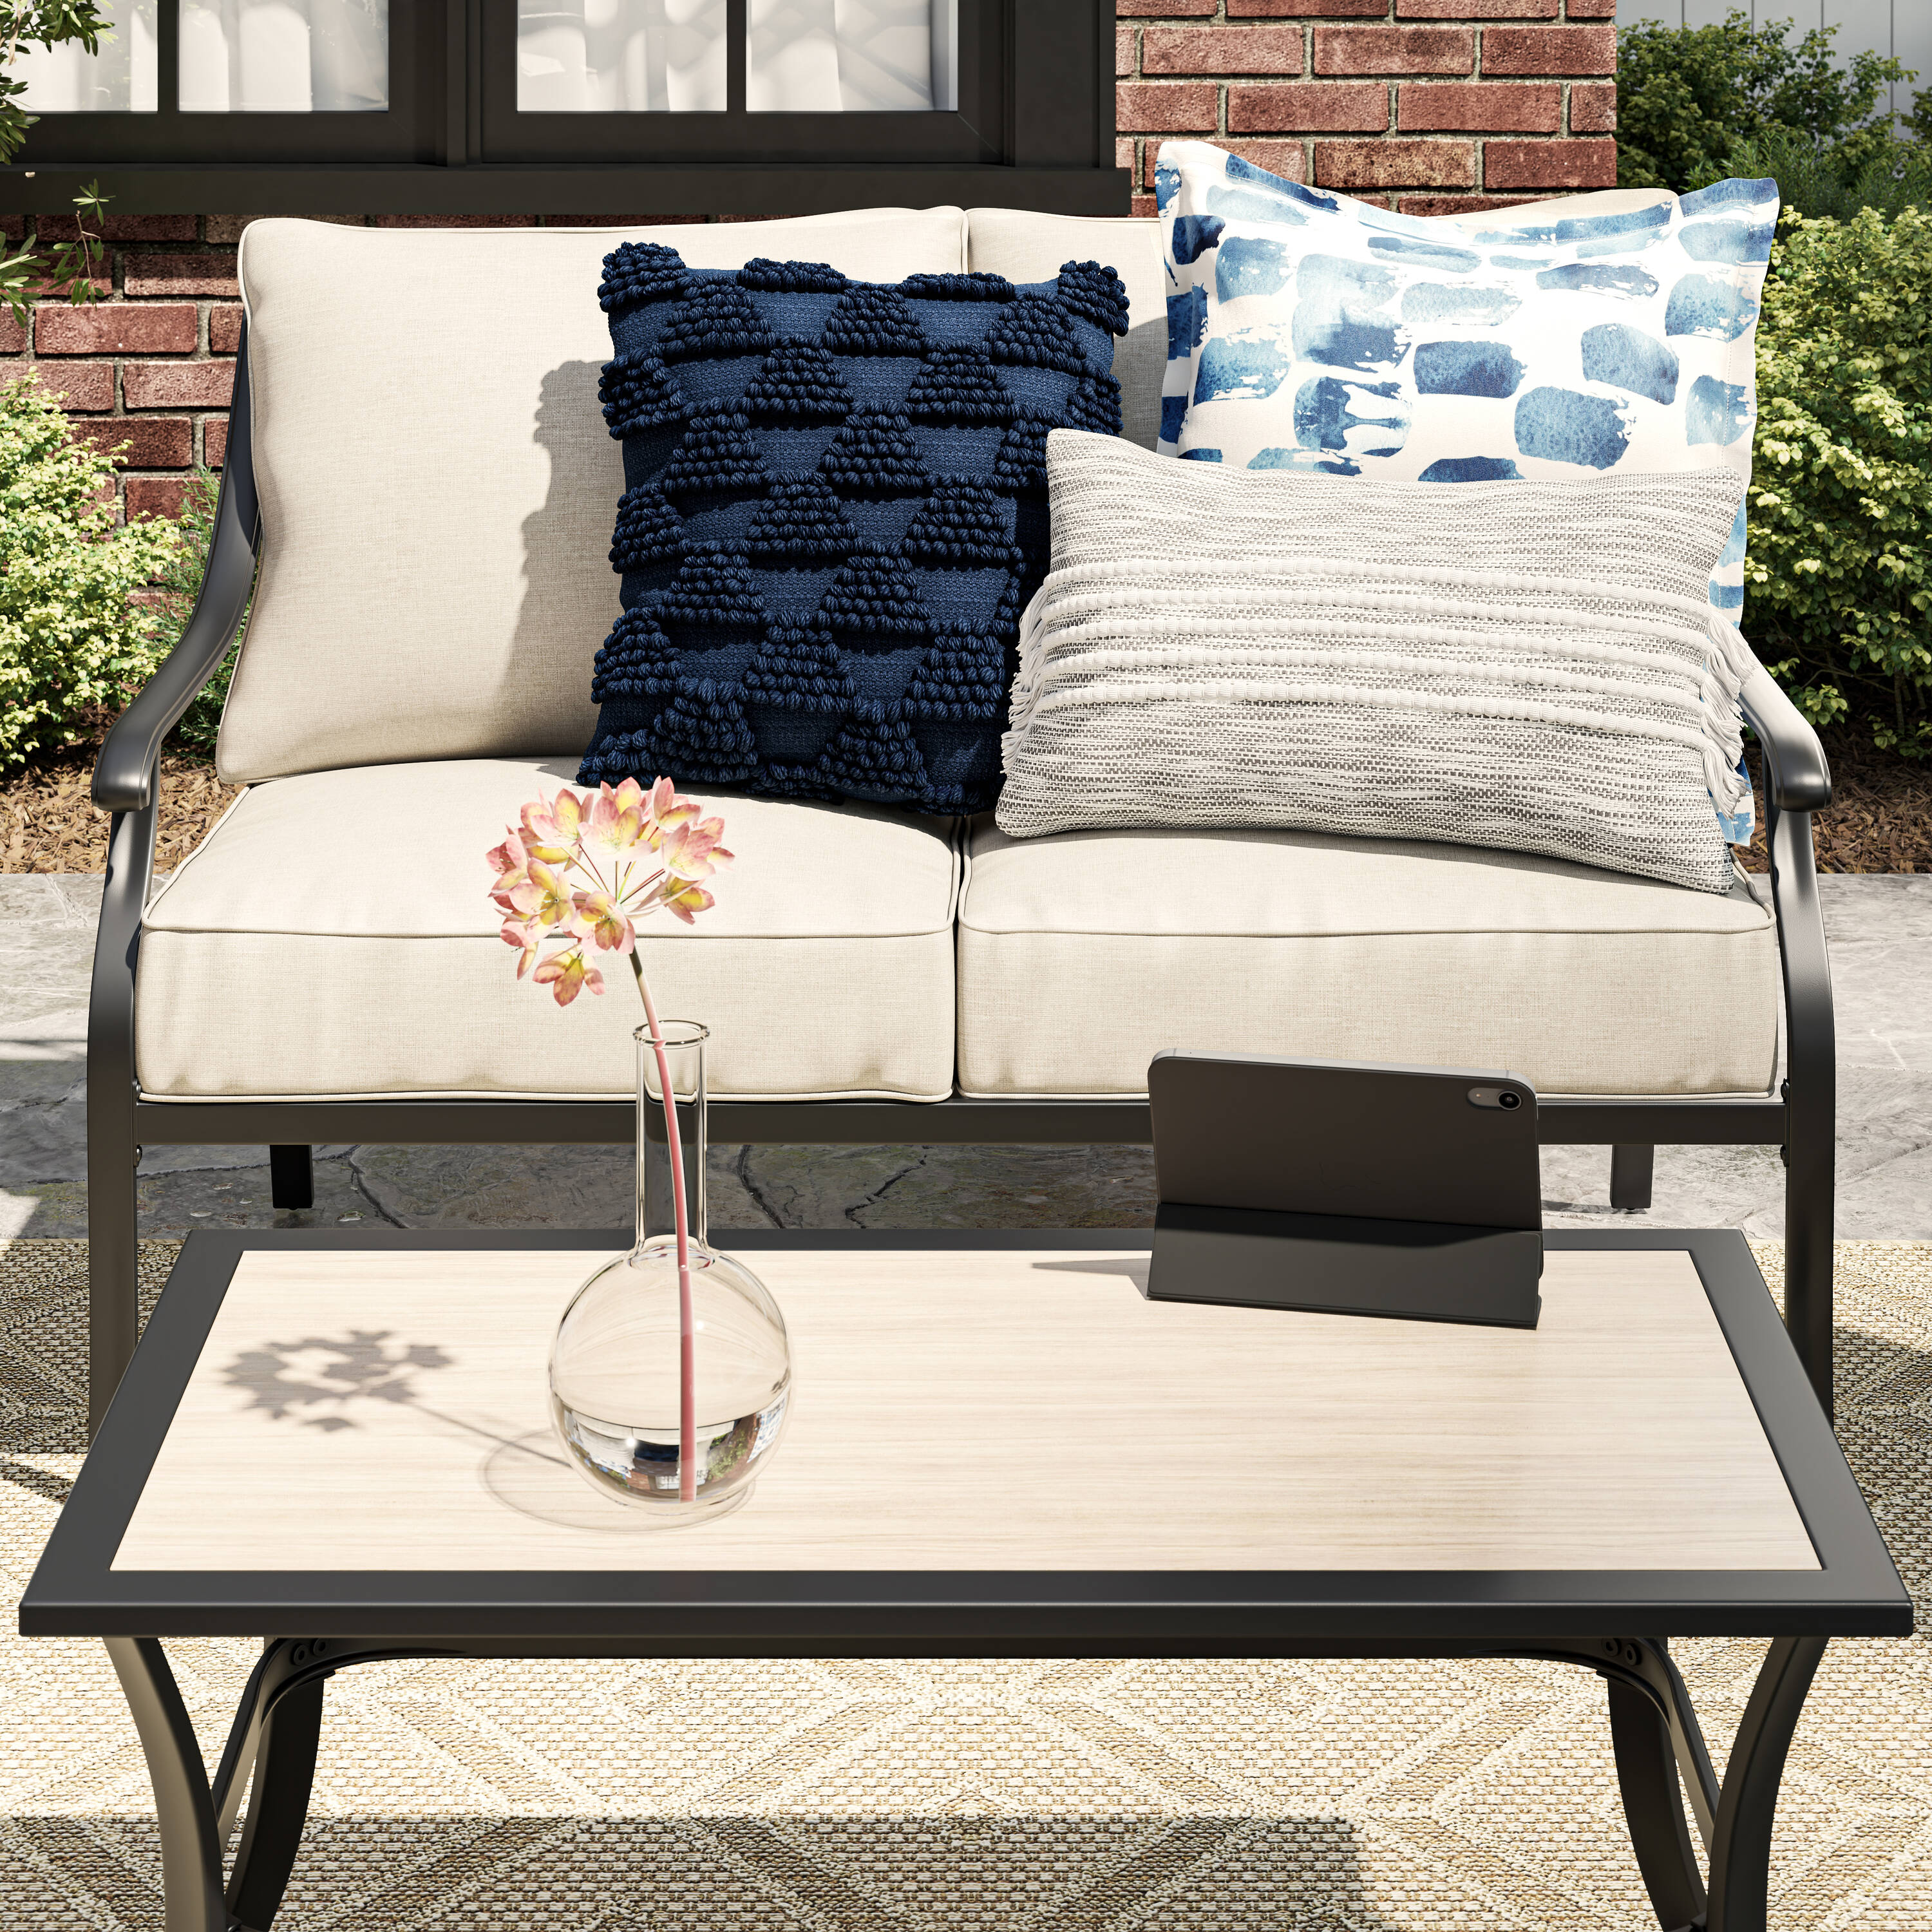 patio furniture sets at lowes